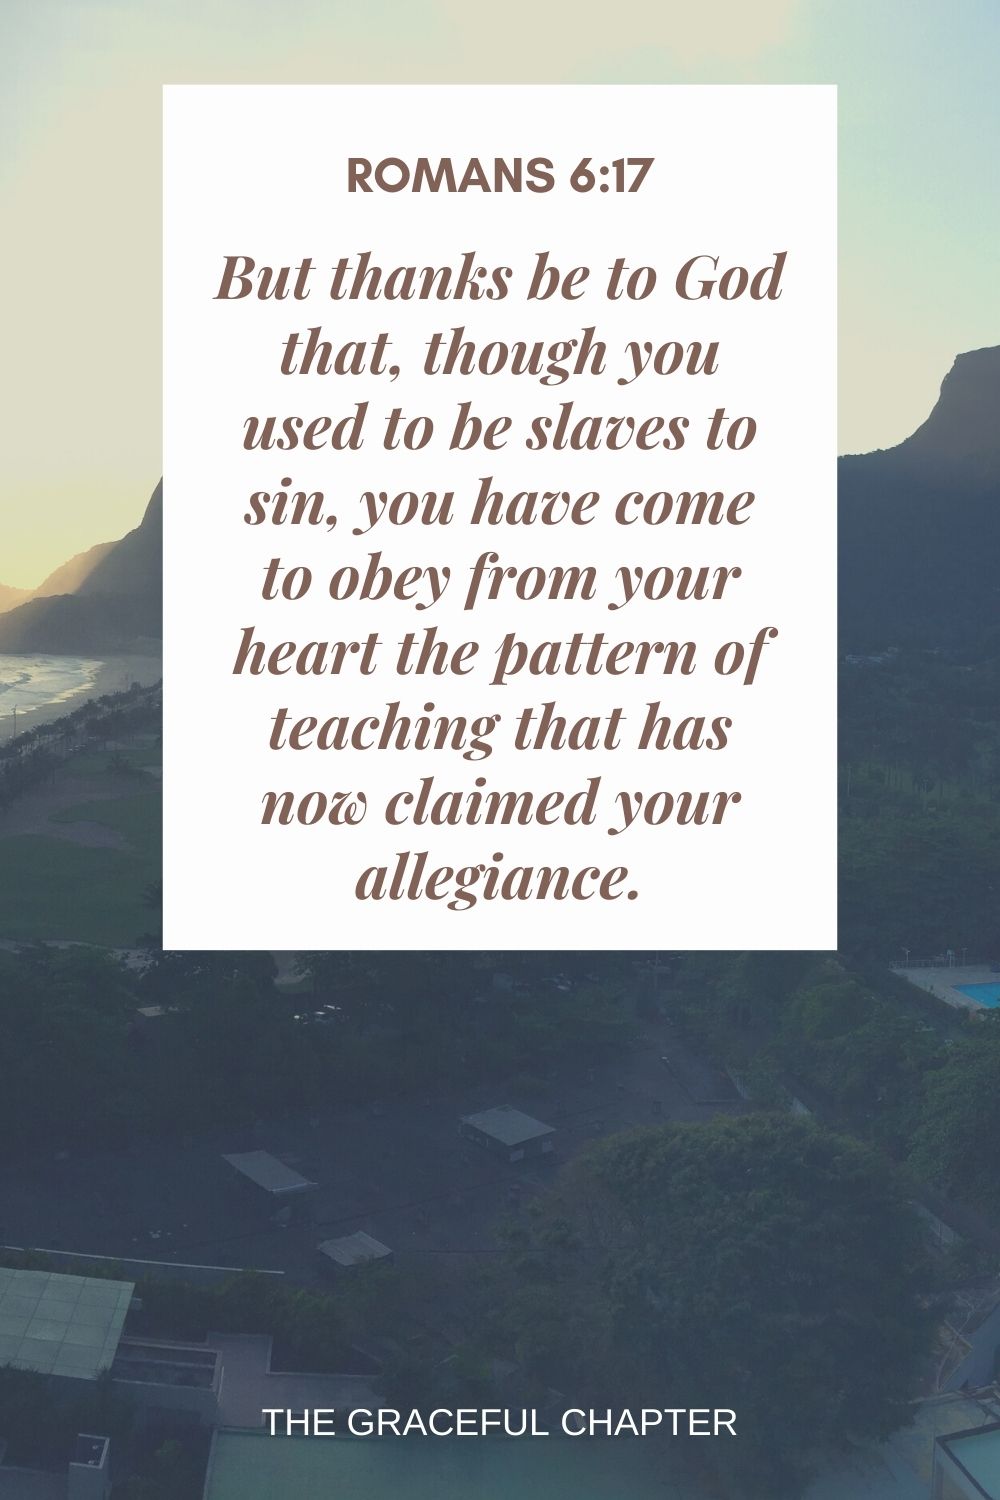 But thanks be to God that, though you used to be slaves to sin, you have come to obey from your heart the pattern of teaching that has now claimed your allegiance. Romans 6:17